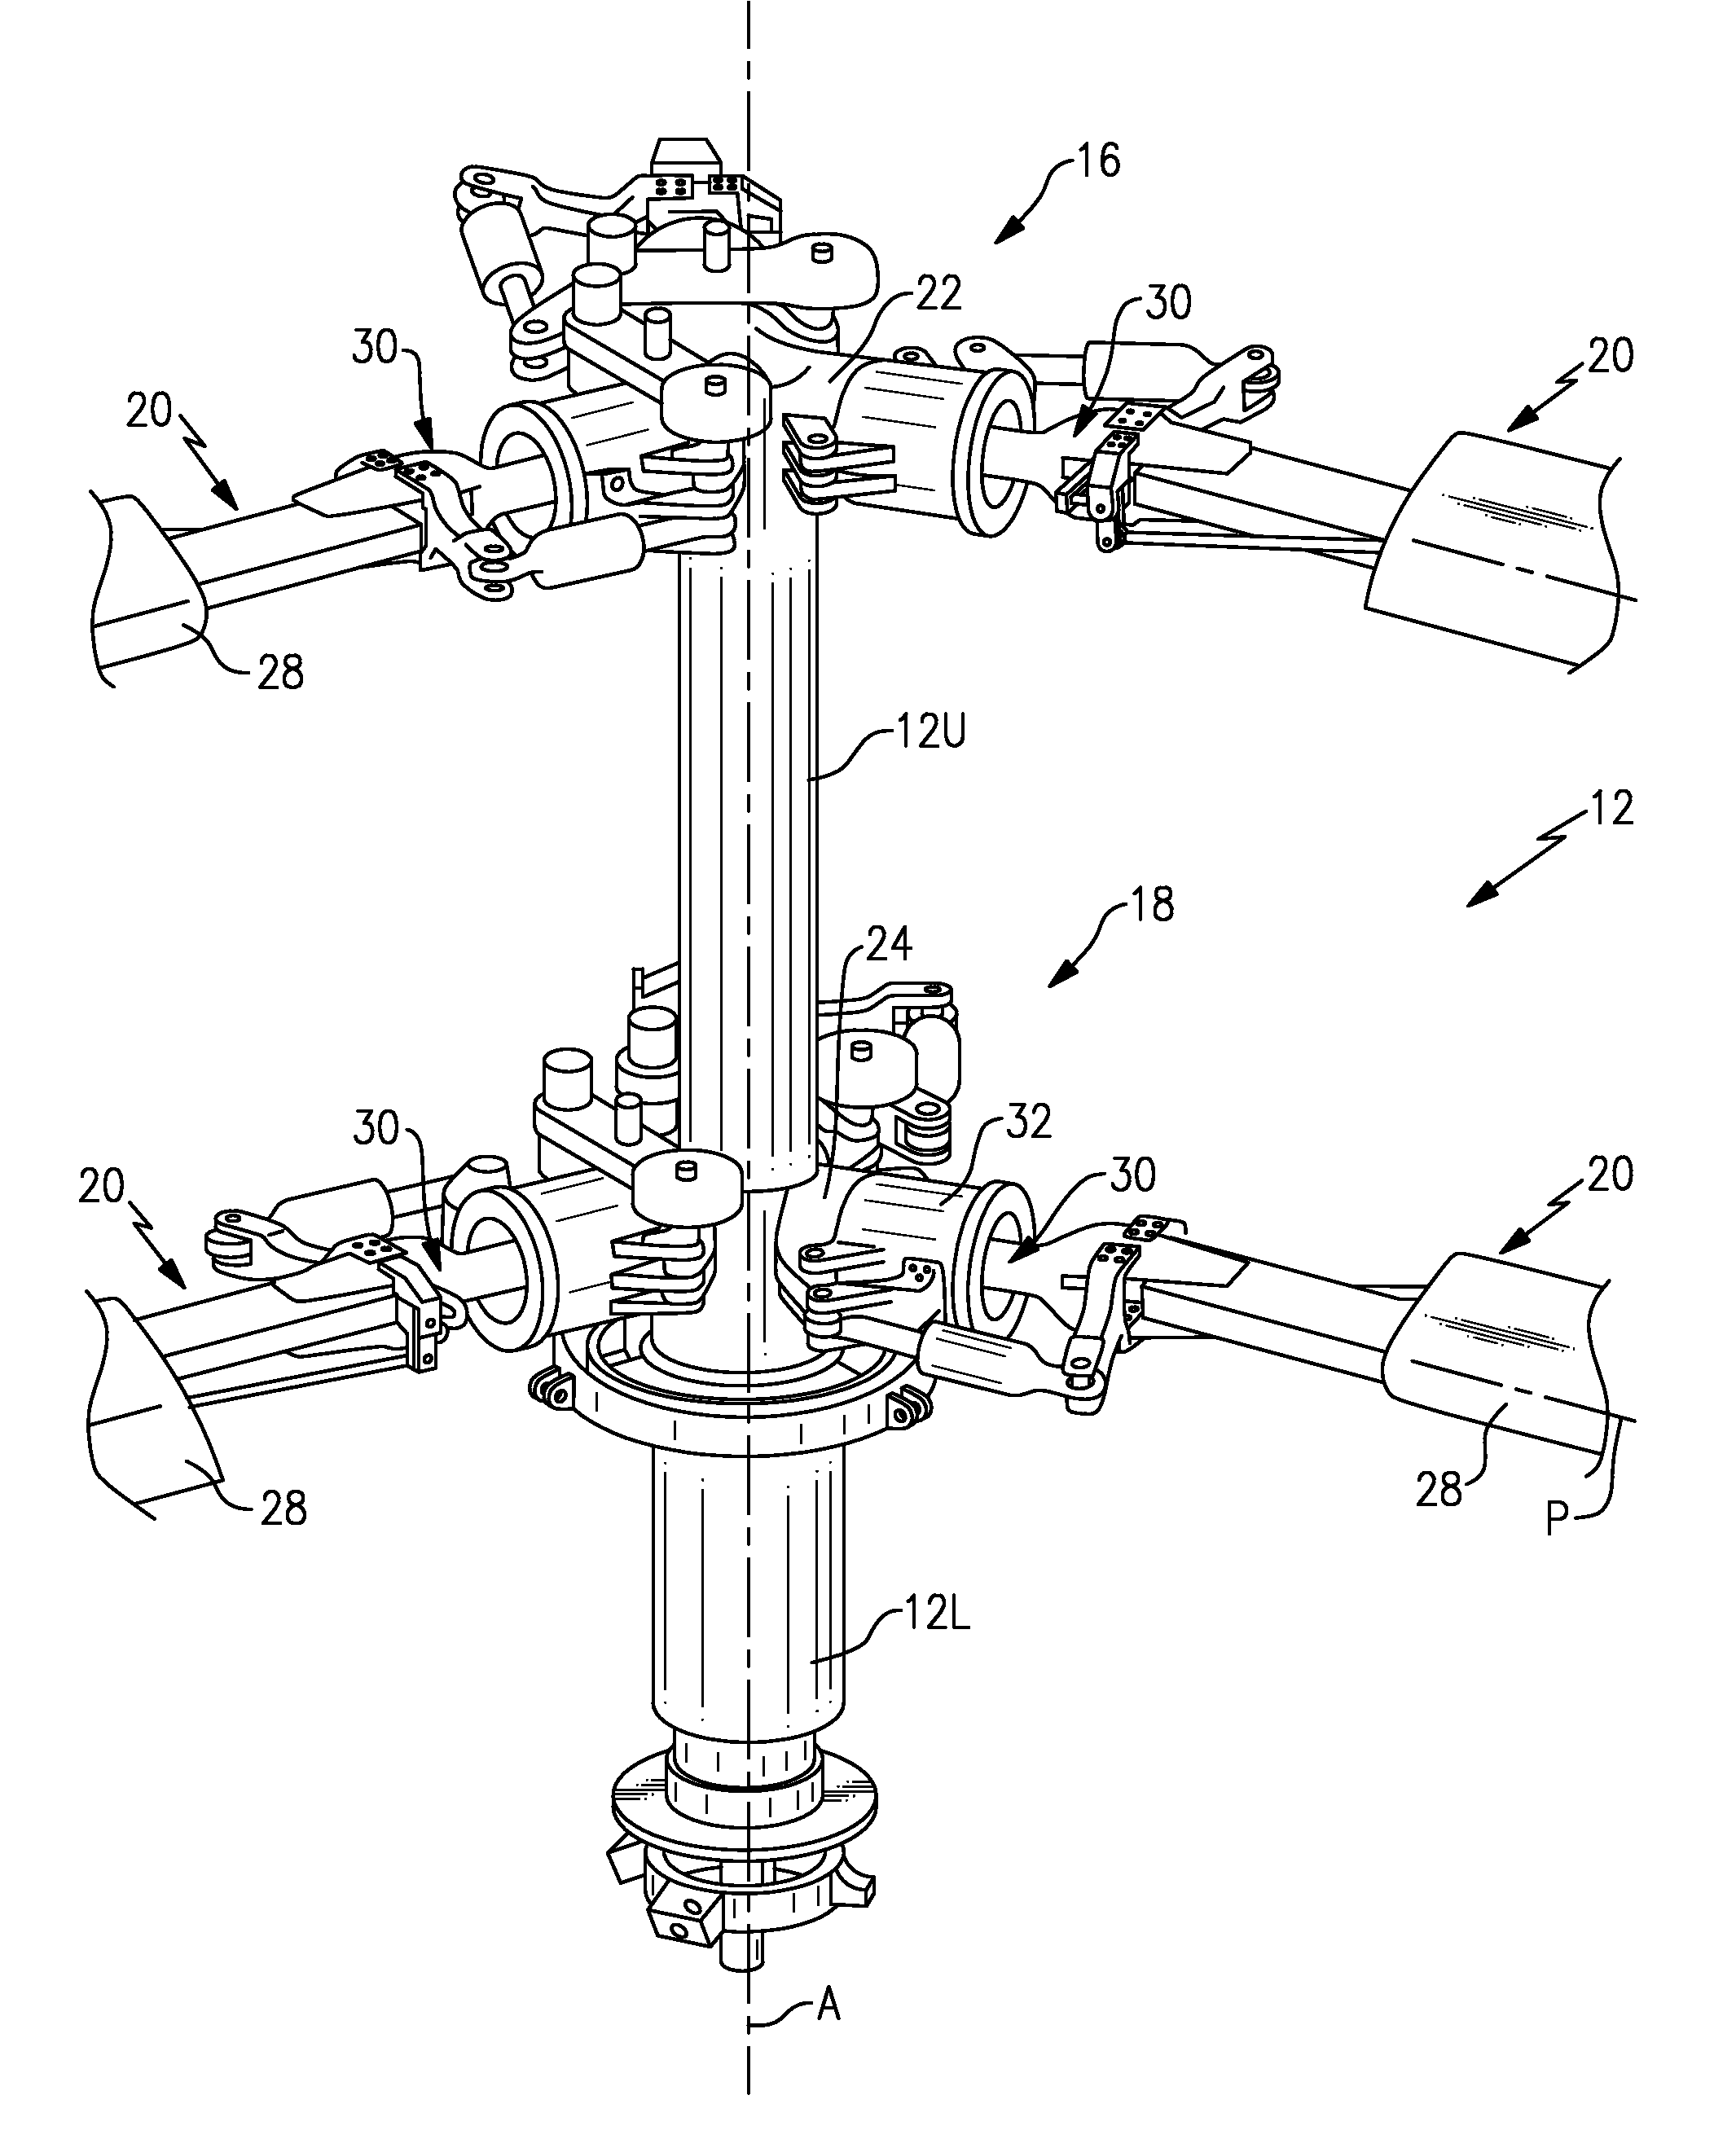 Rotor system with pitch flap coupling